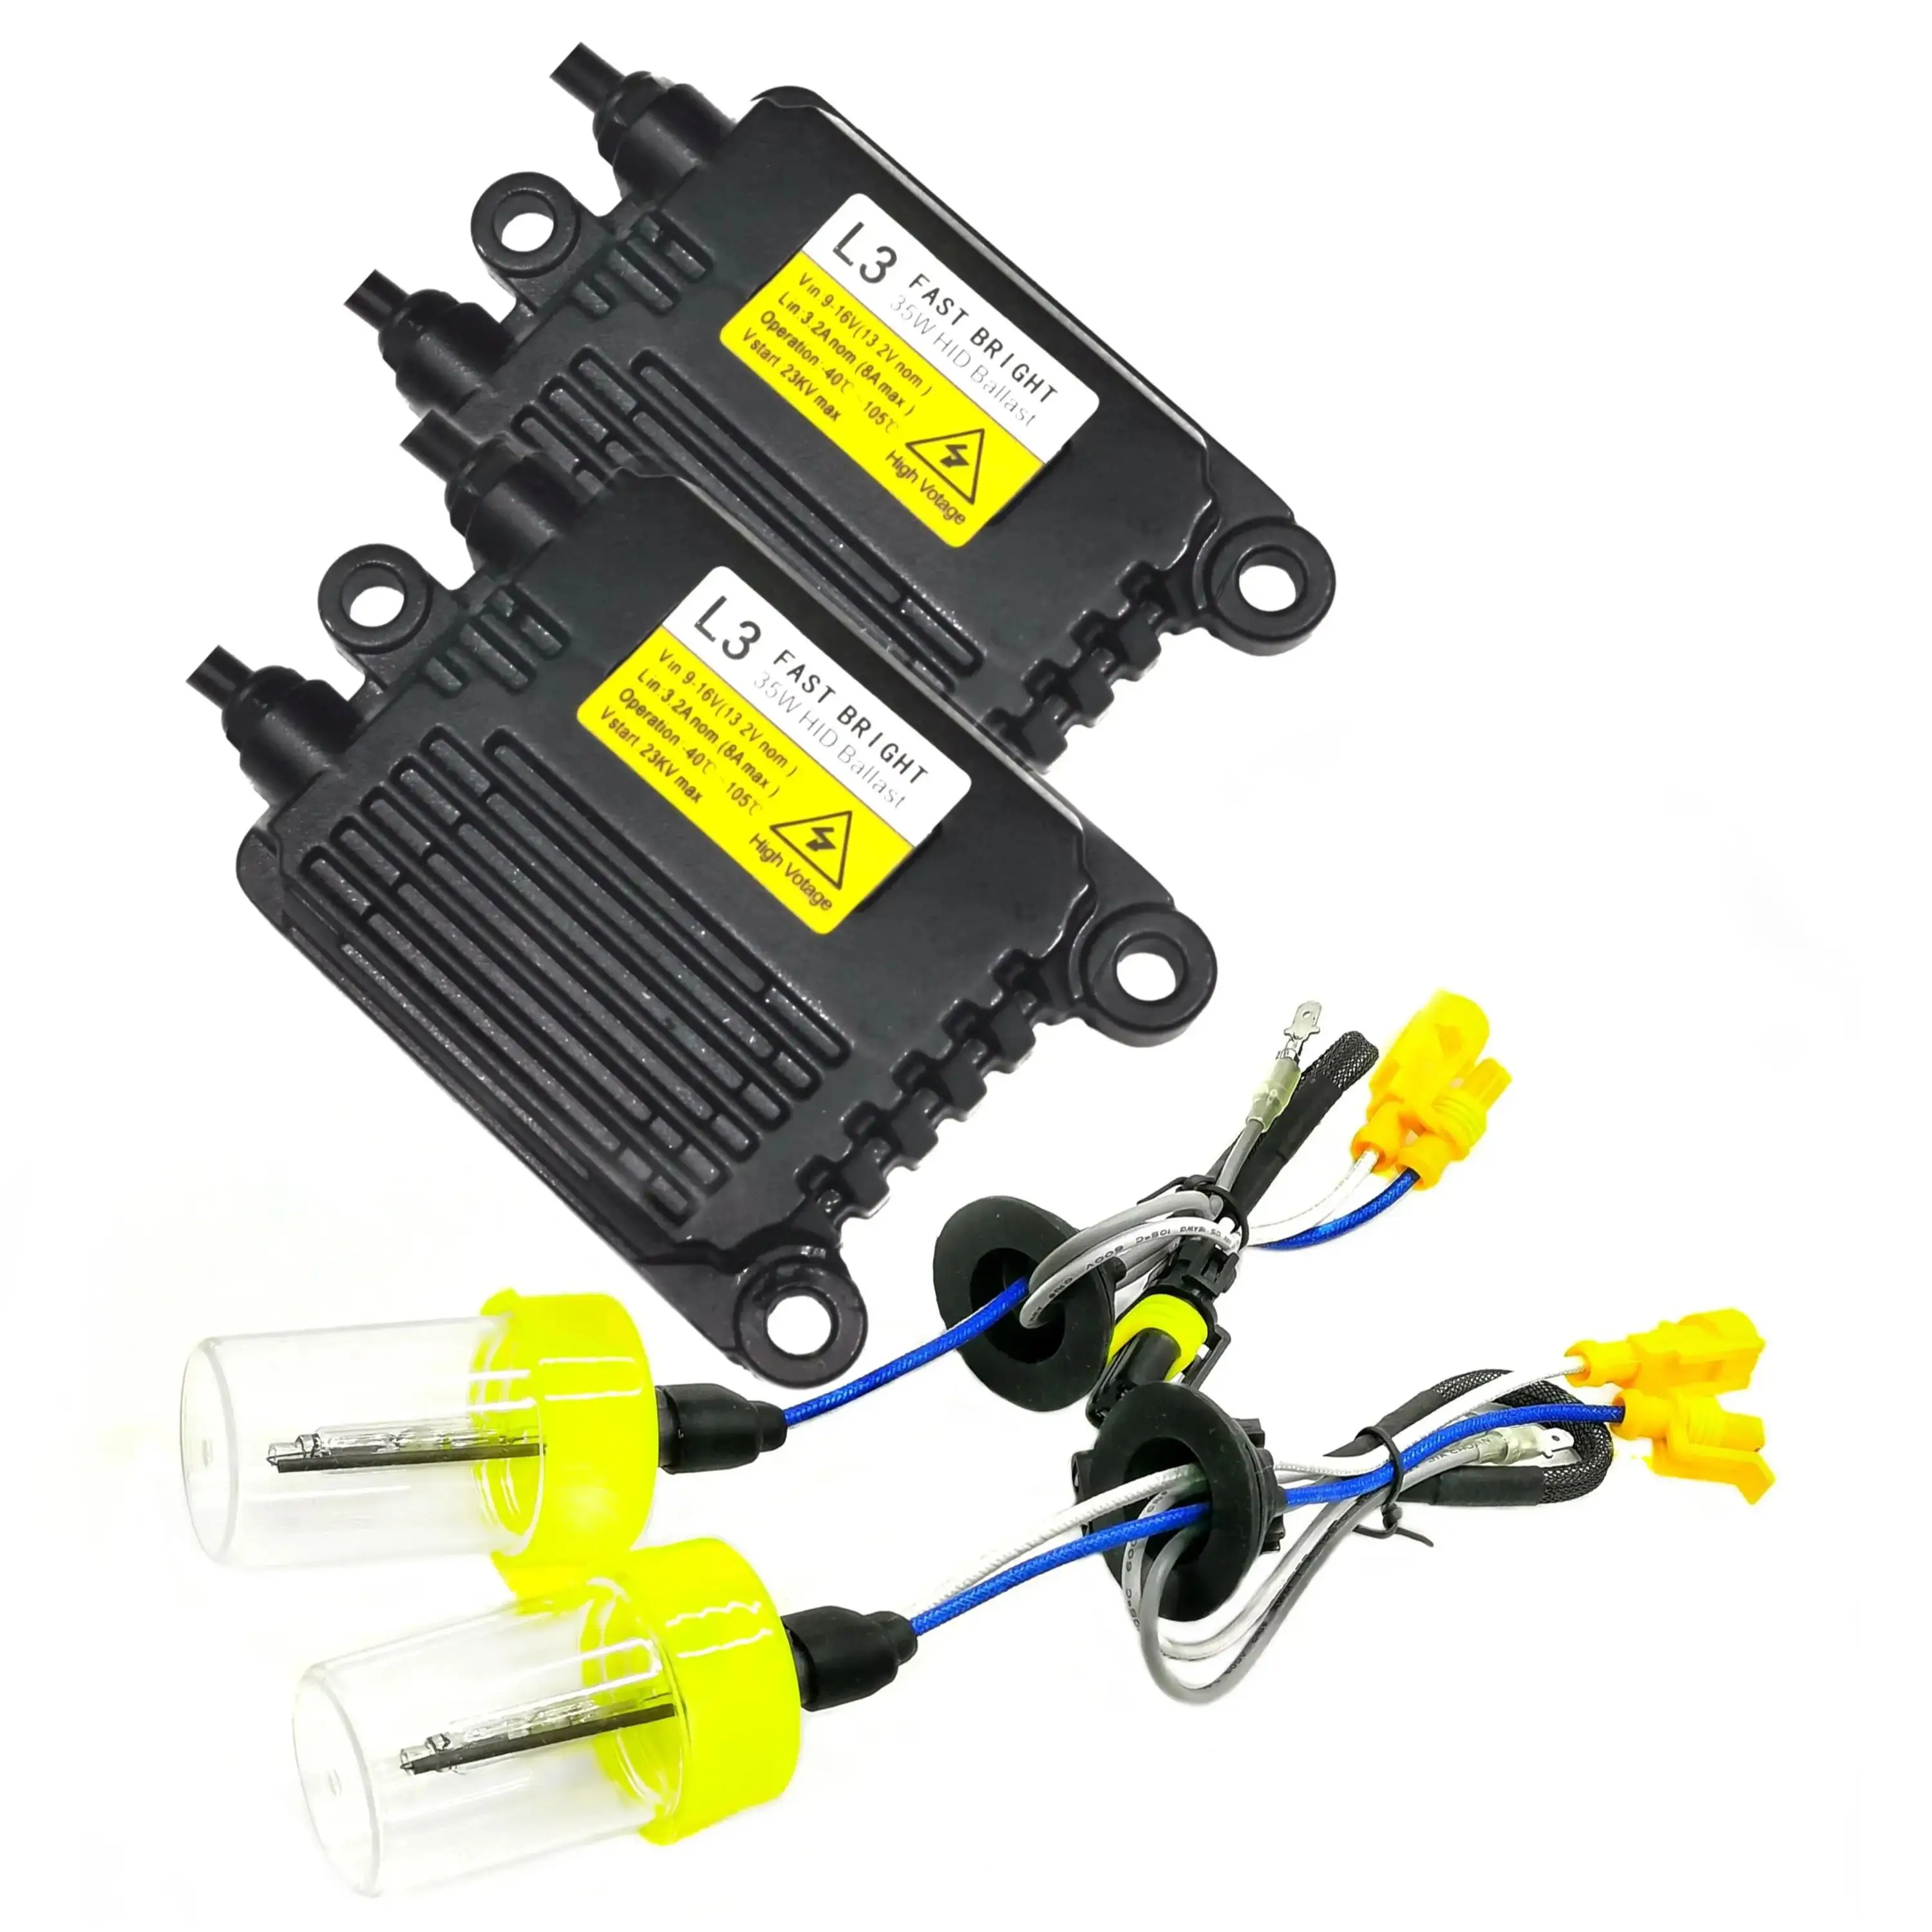 

Premium AC 35W Xenon Kits H1 H3 H7 H11 HB3 HB4 H8 H9 Globes 9005 9006 3800lm Cars HID Lighting Headlights Replacement Foglamps